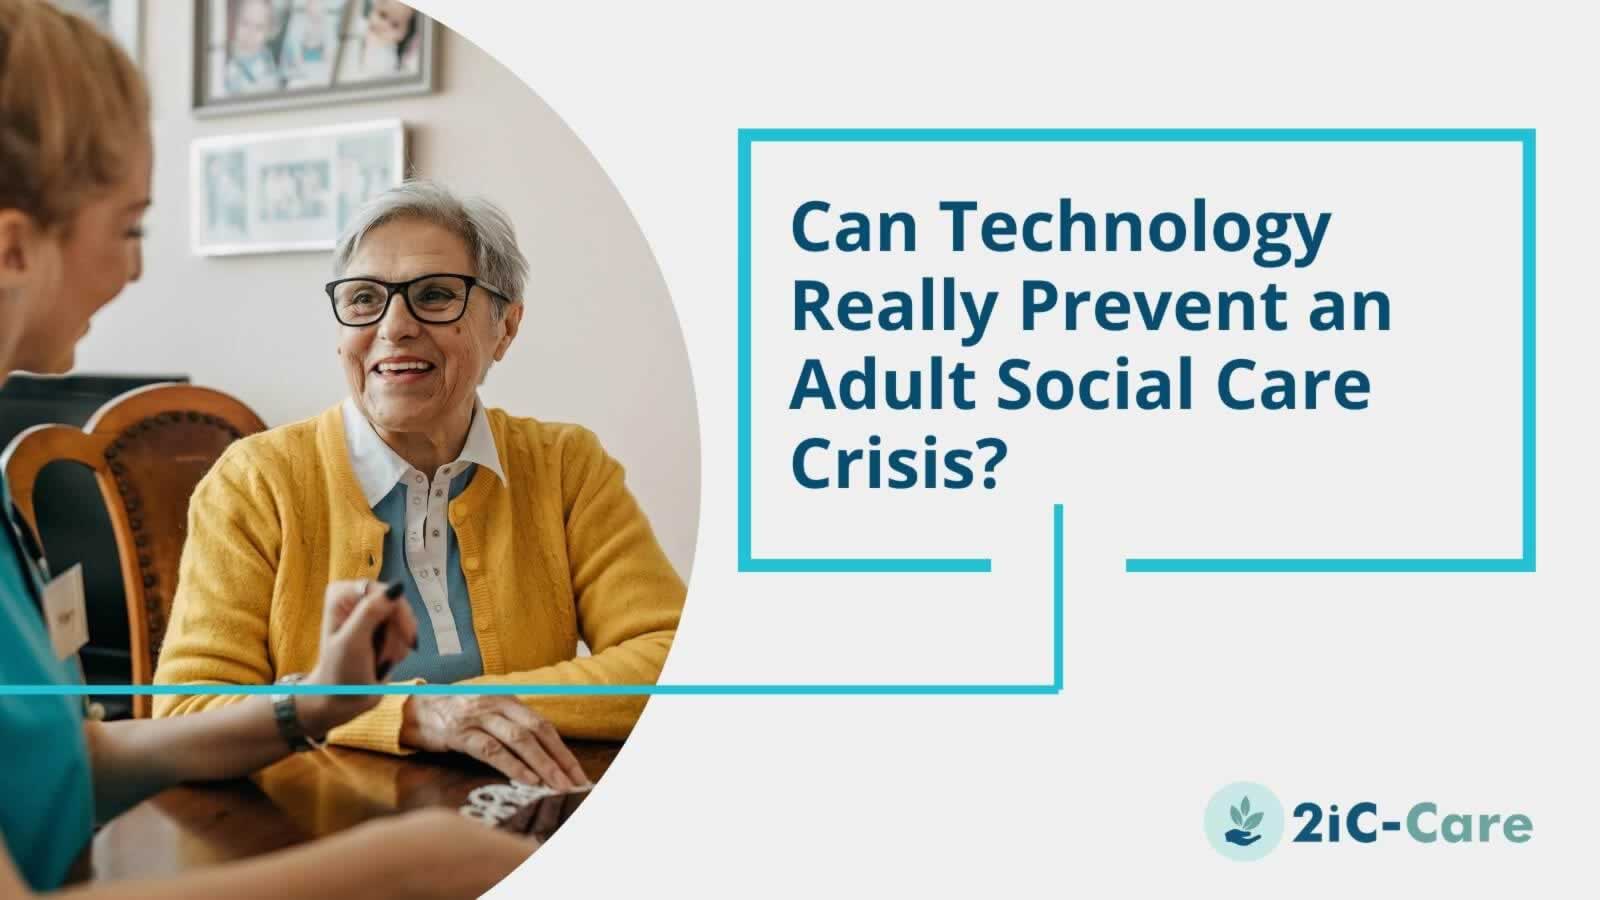 Can Technology Really Prevent an Adult Social Care Crisis?